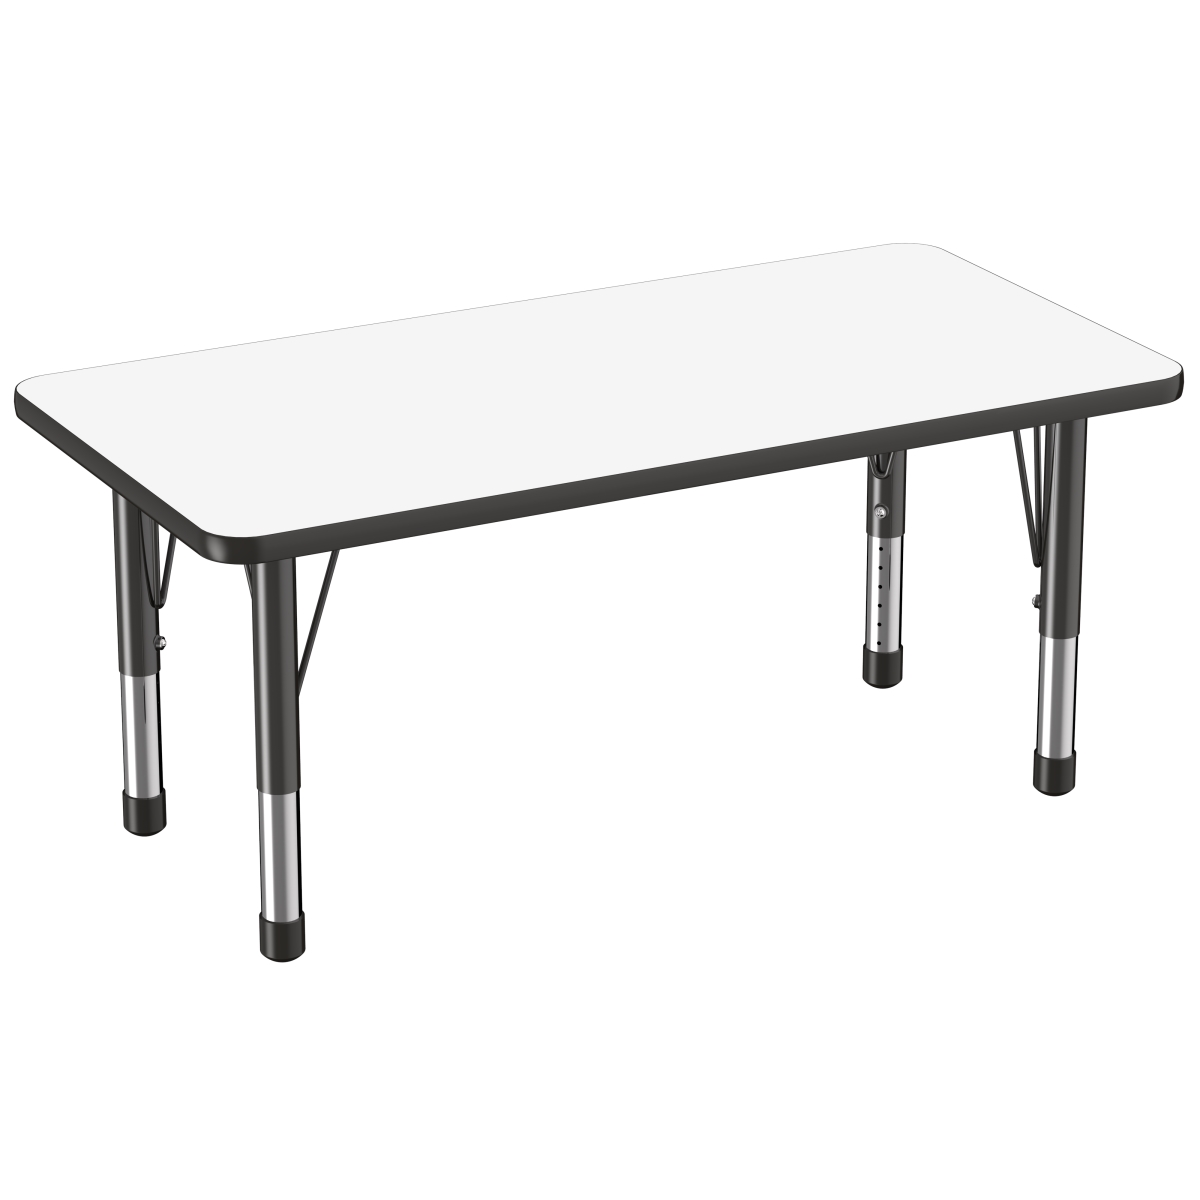 10162-debk 24 X 48 In. Rectangle Dry-erase Adjustable Activity Table With Chunky Leg - Black